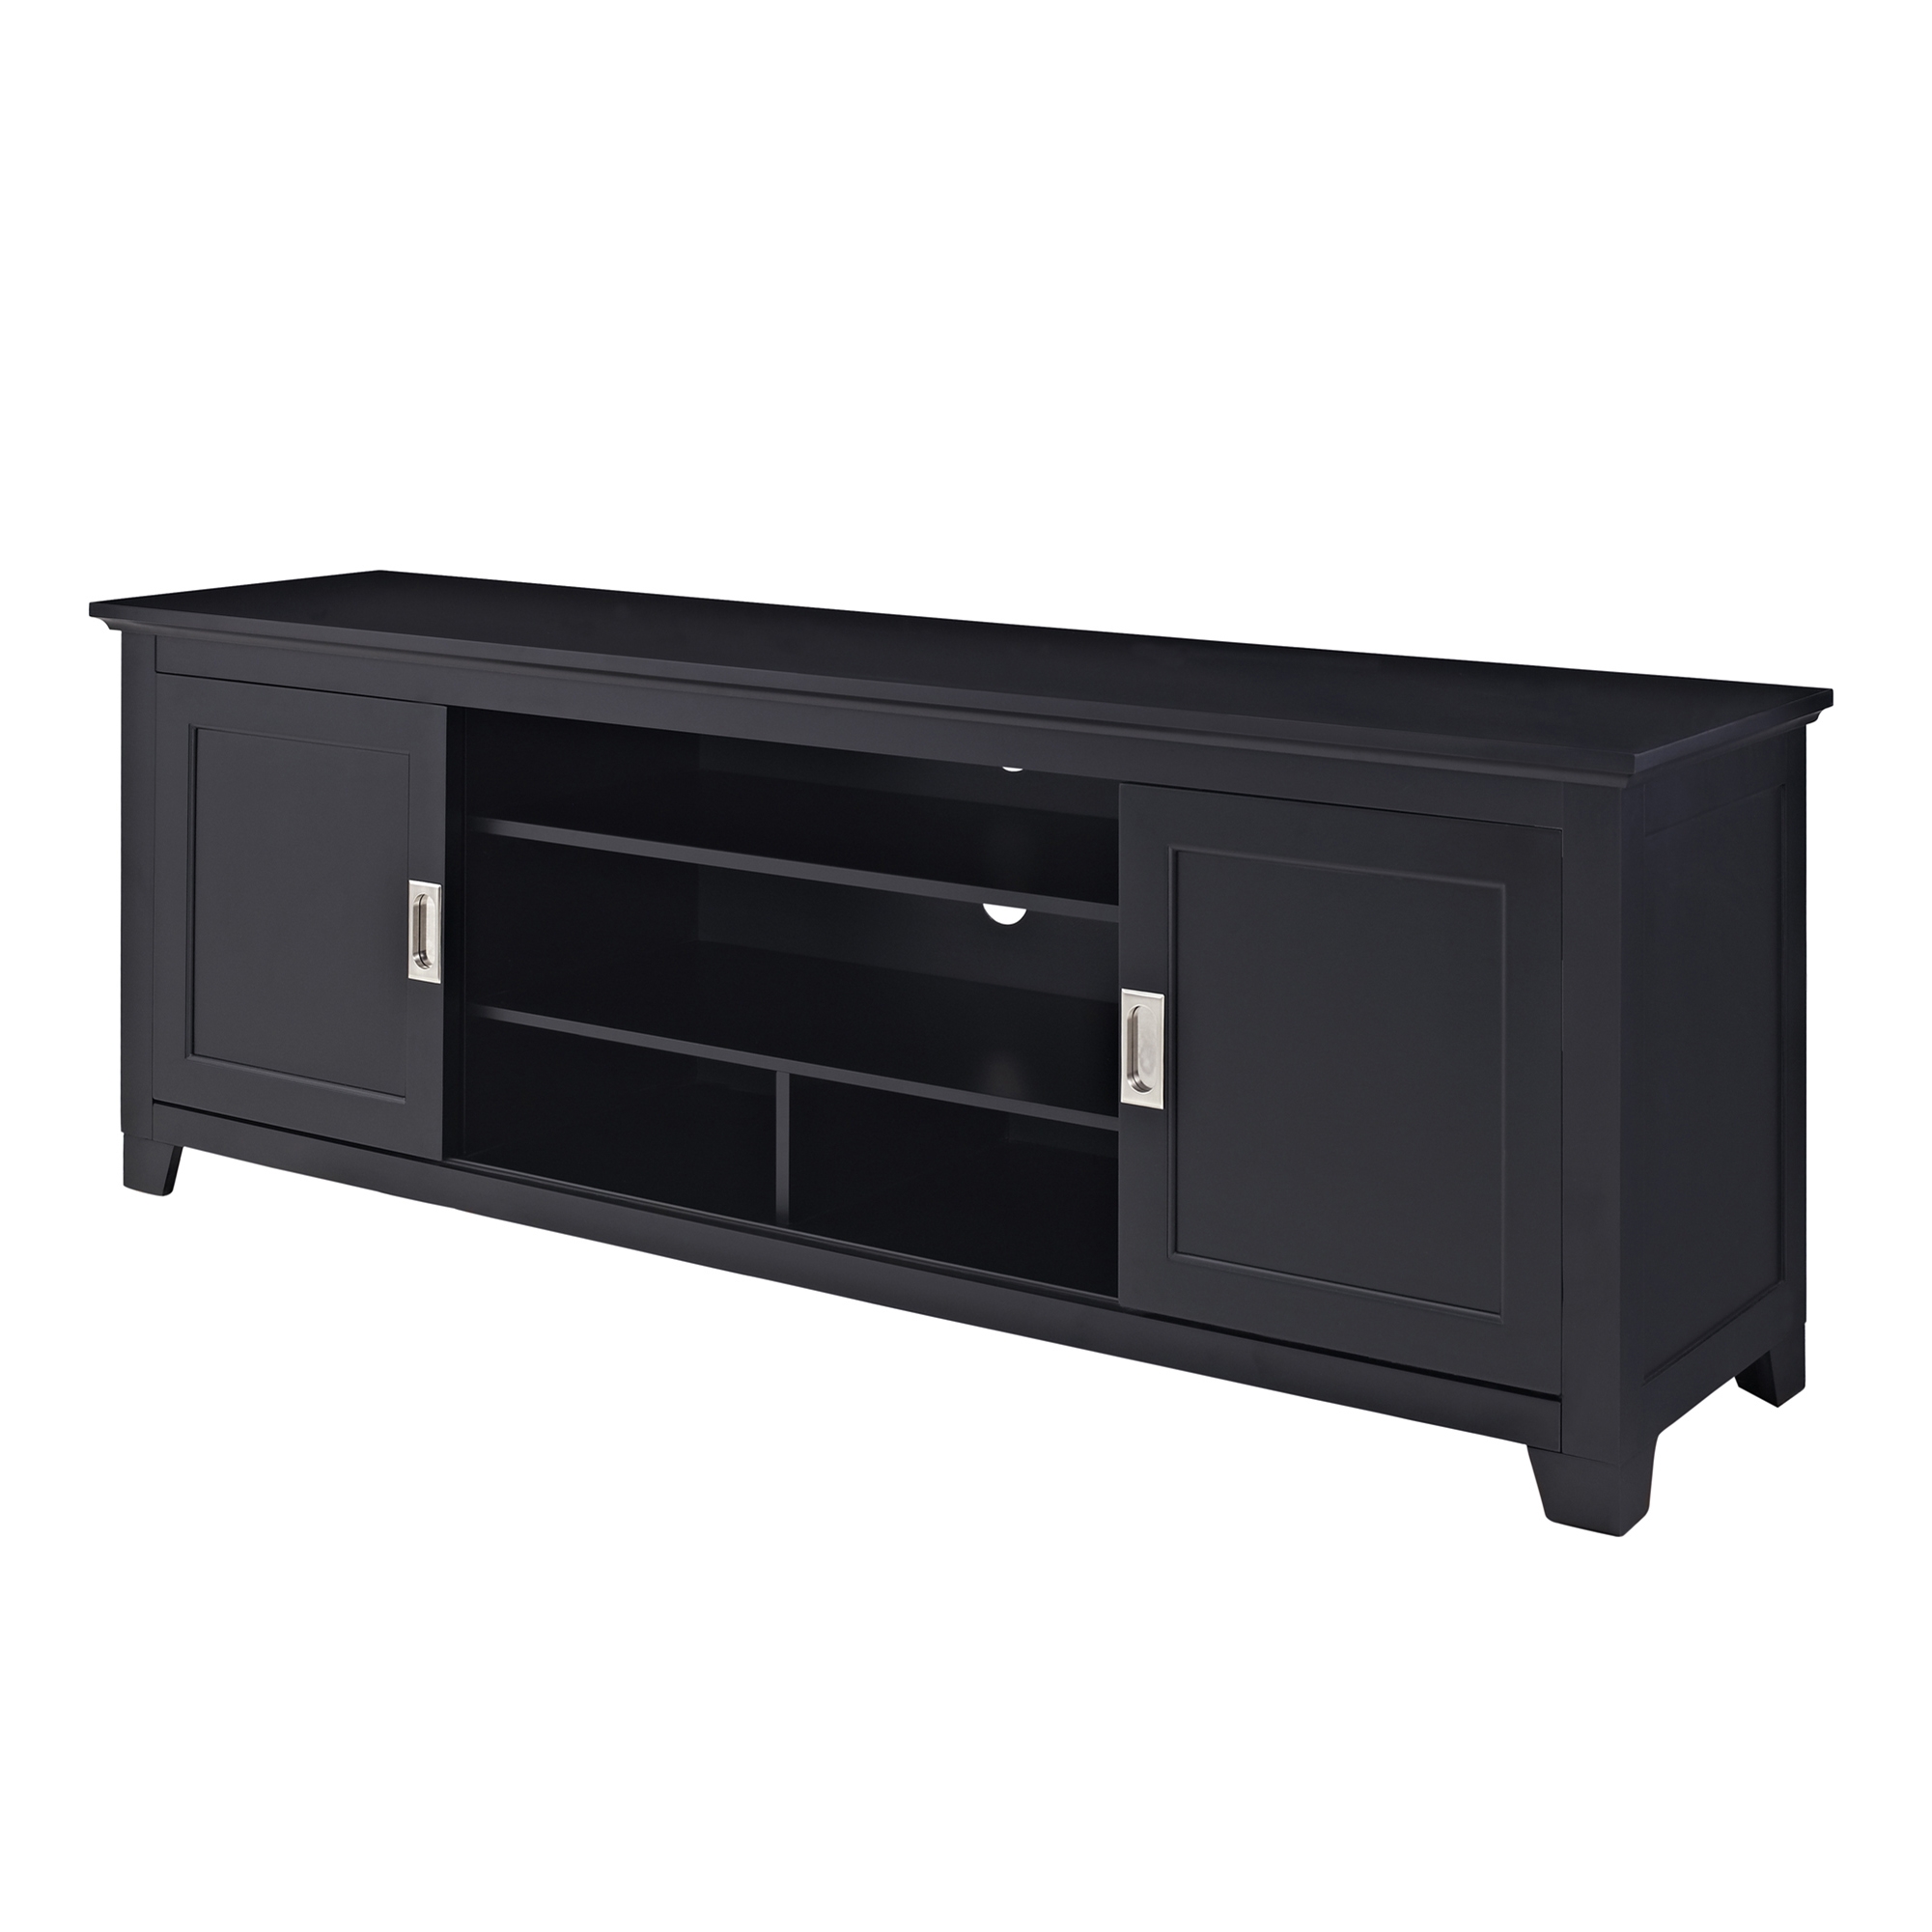 Fullview 70" Traditional Wood TV Stand - Black - Image 2